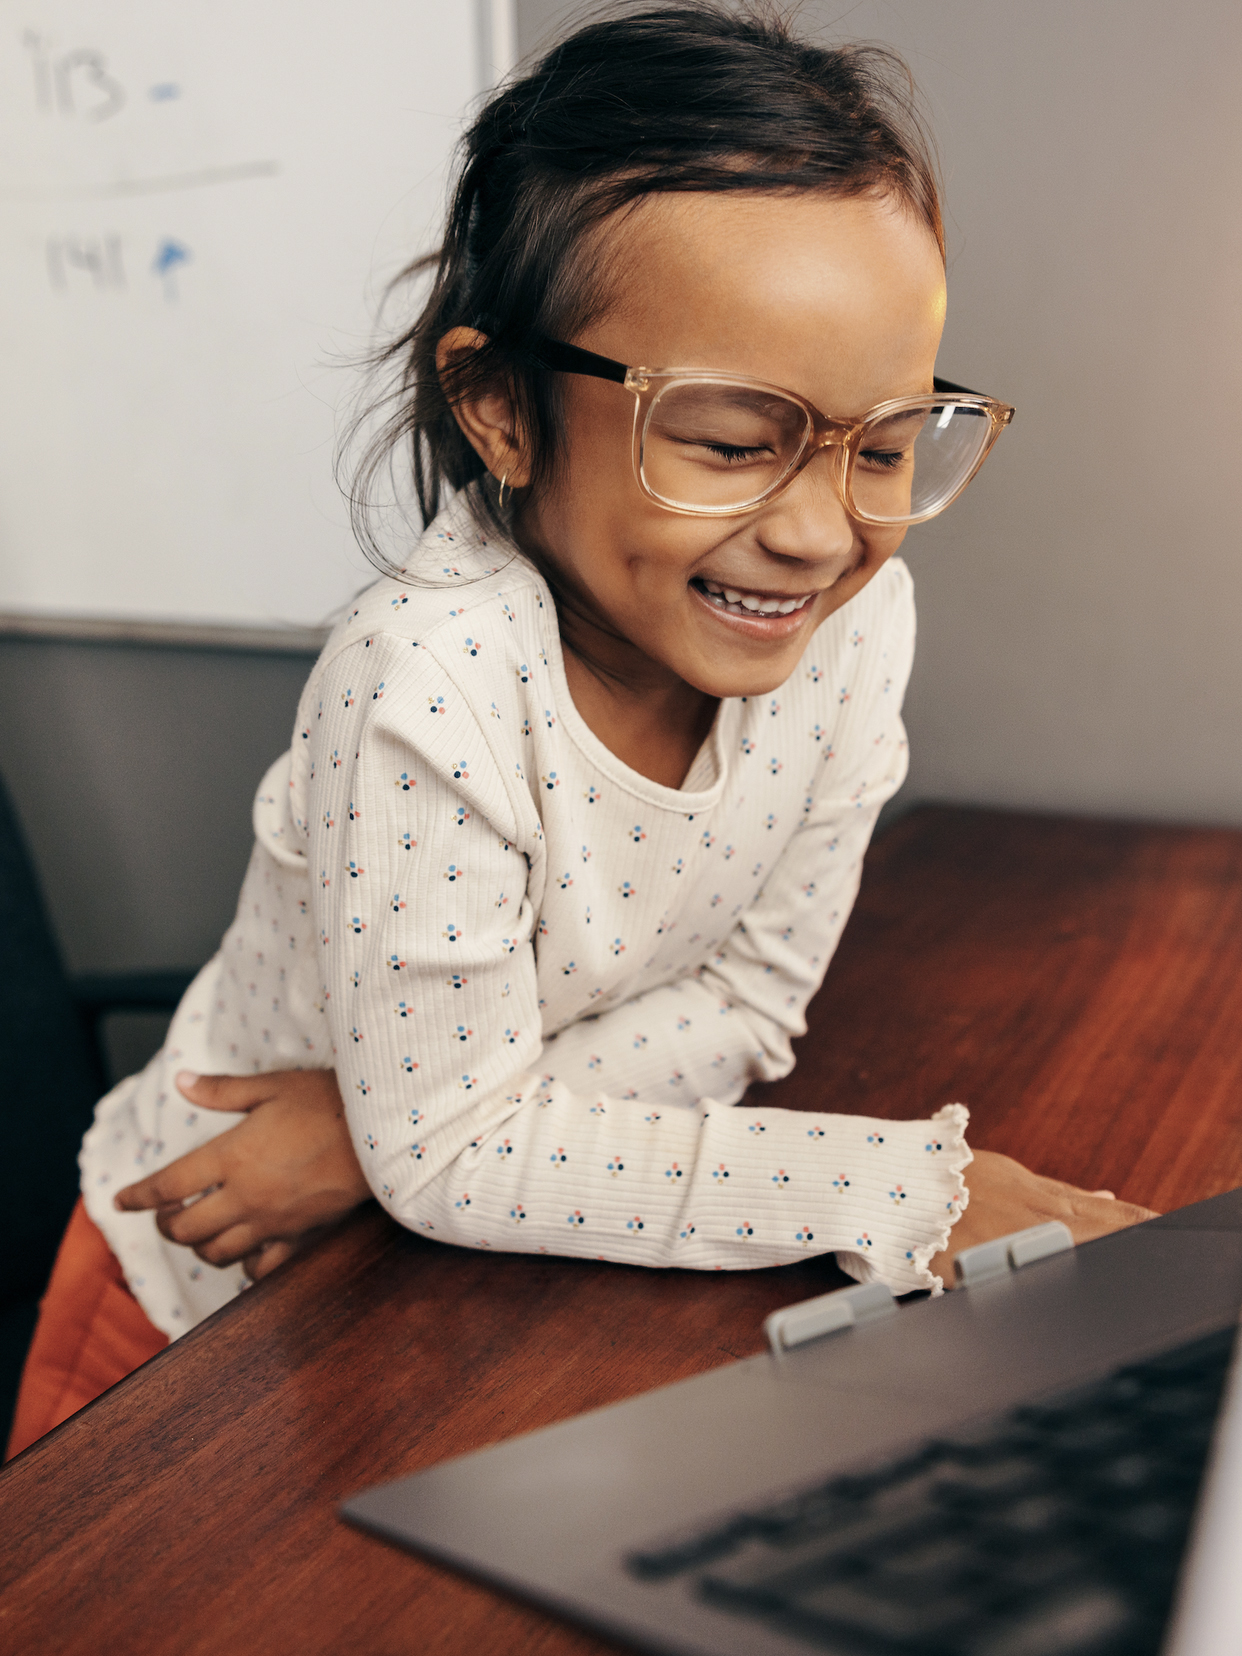 A young girl with glasses laughs in front of a computer.